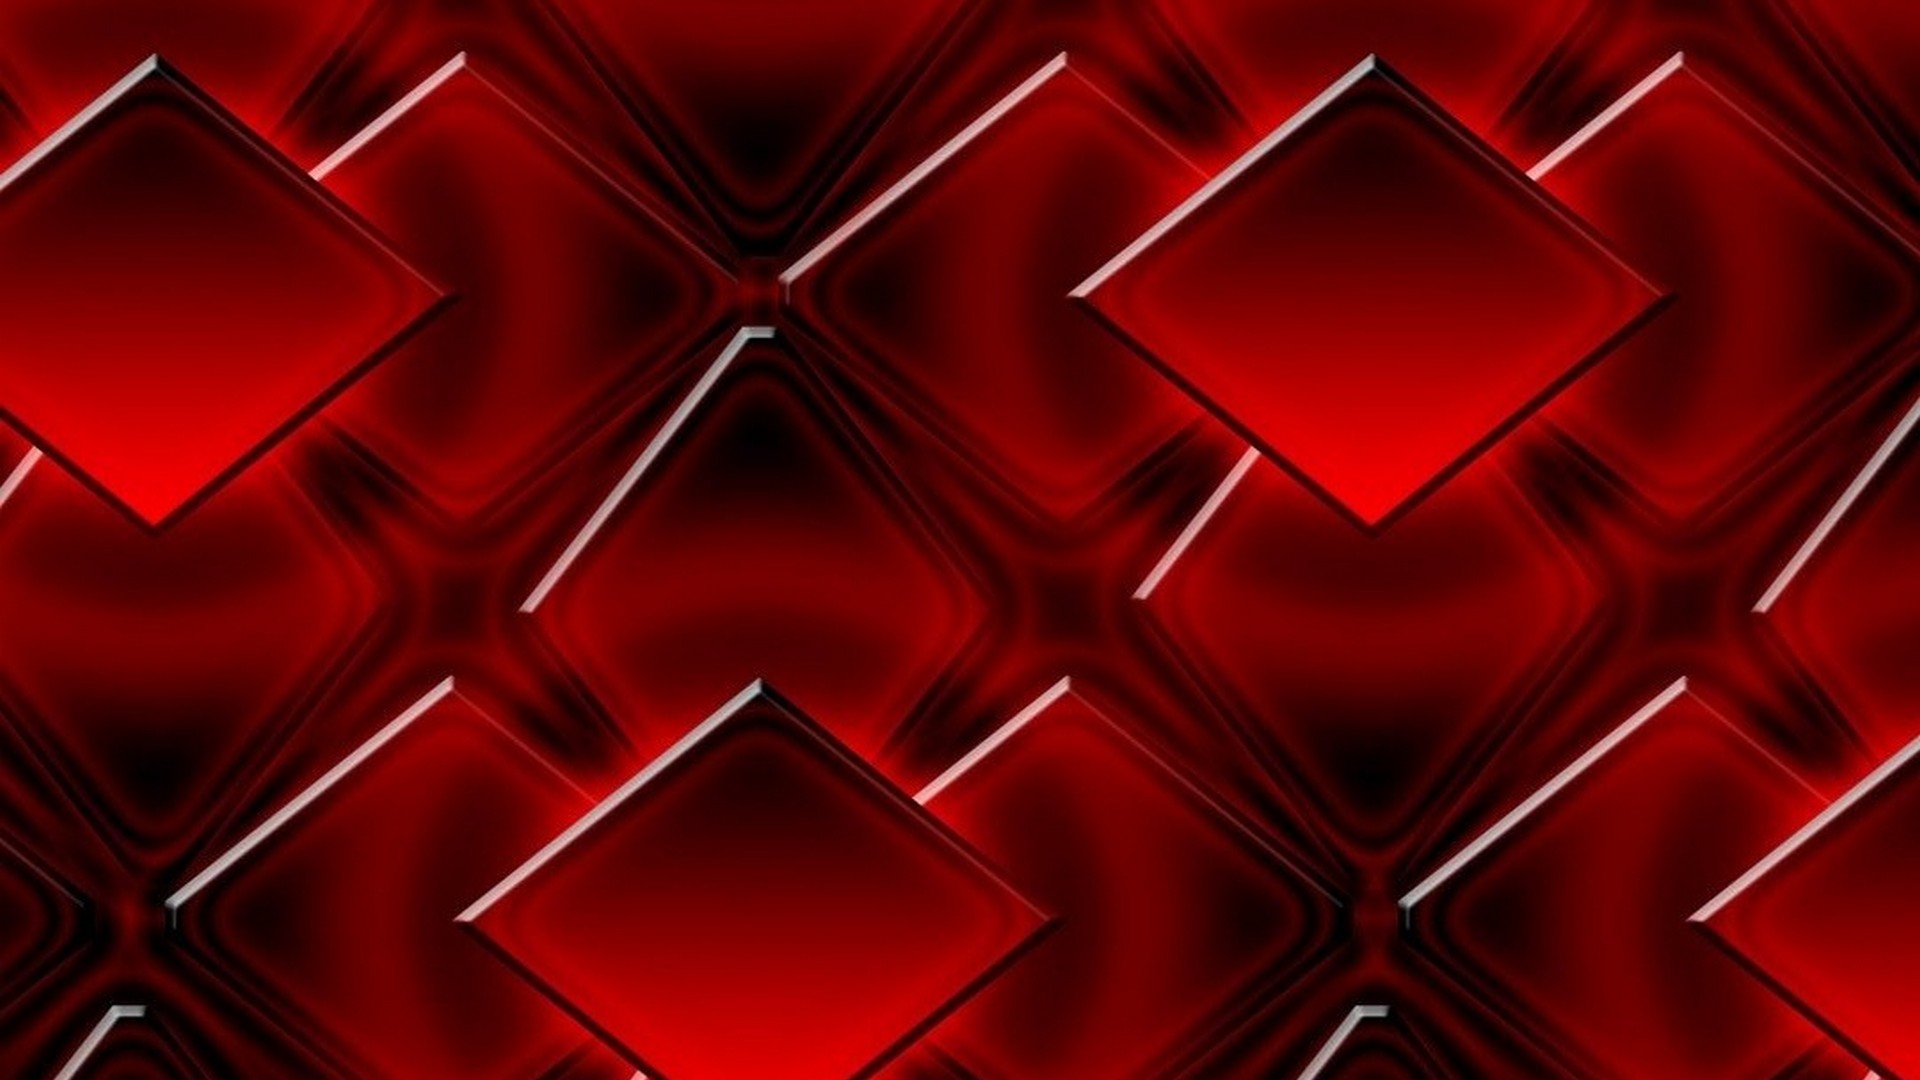 3D Abstract Red Wallpaper 1920x1080